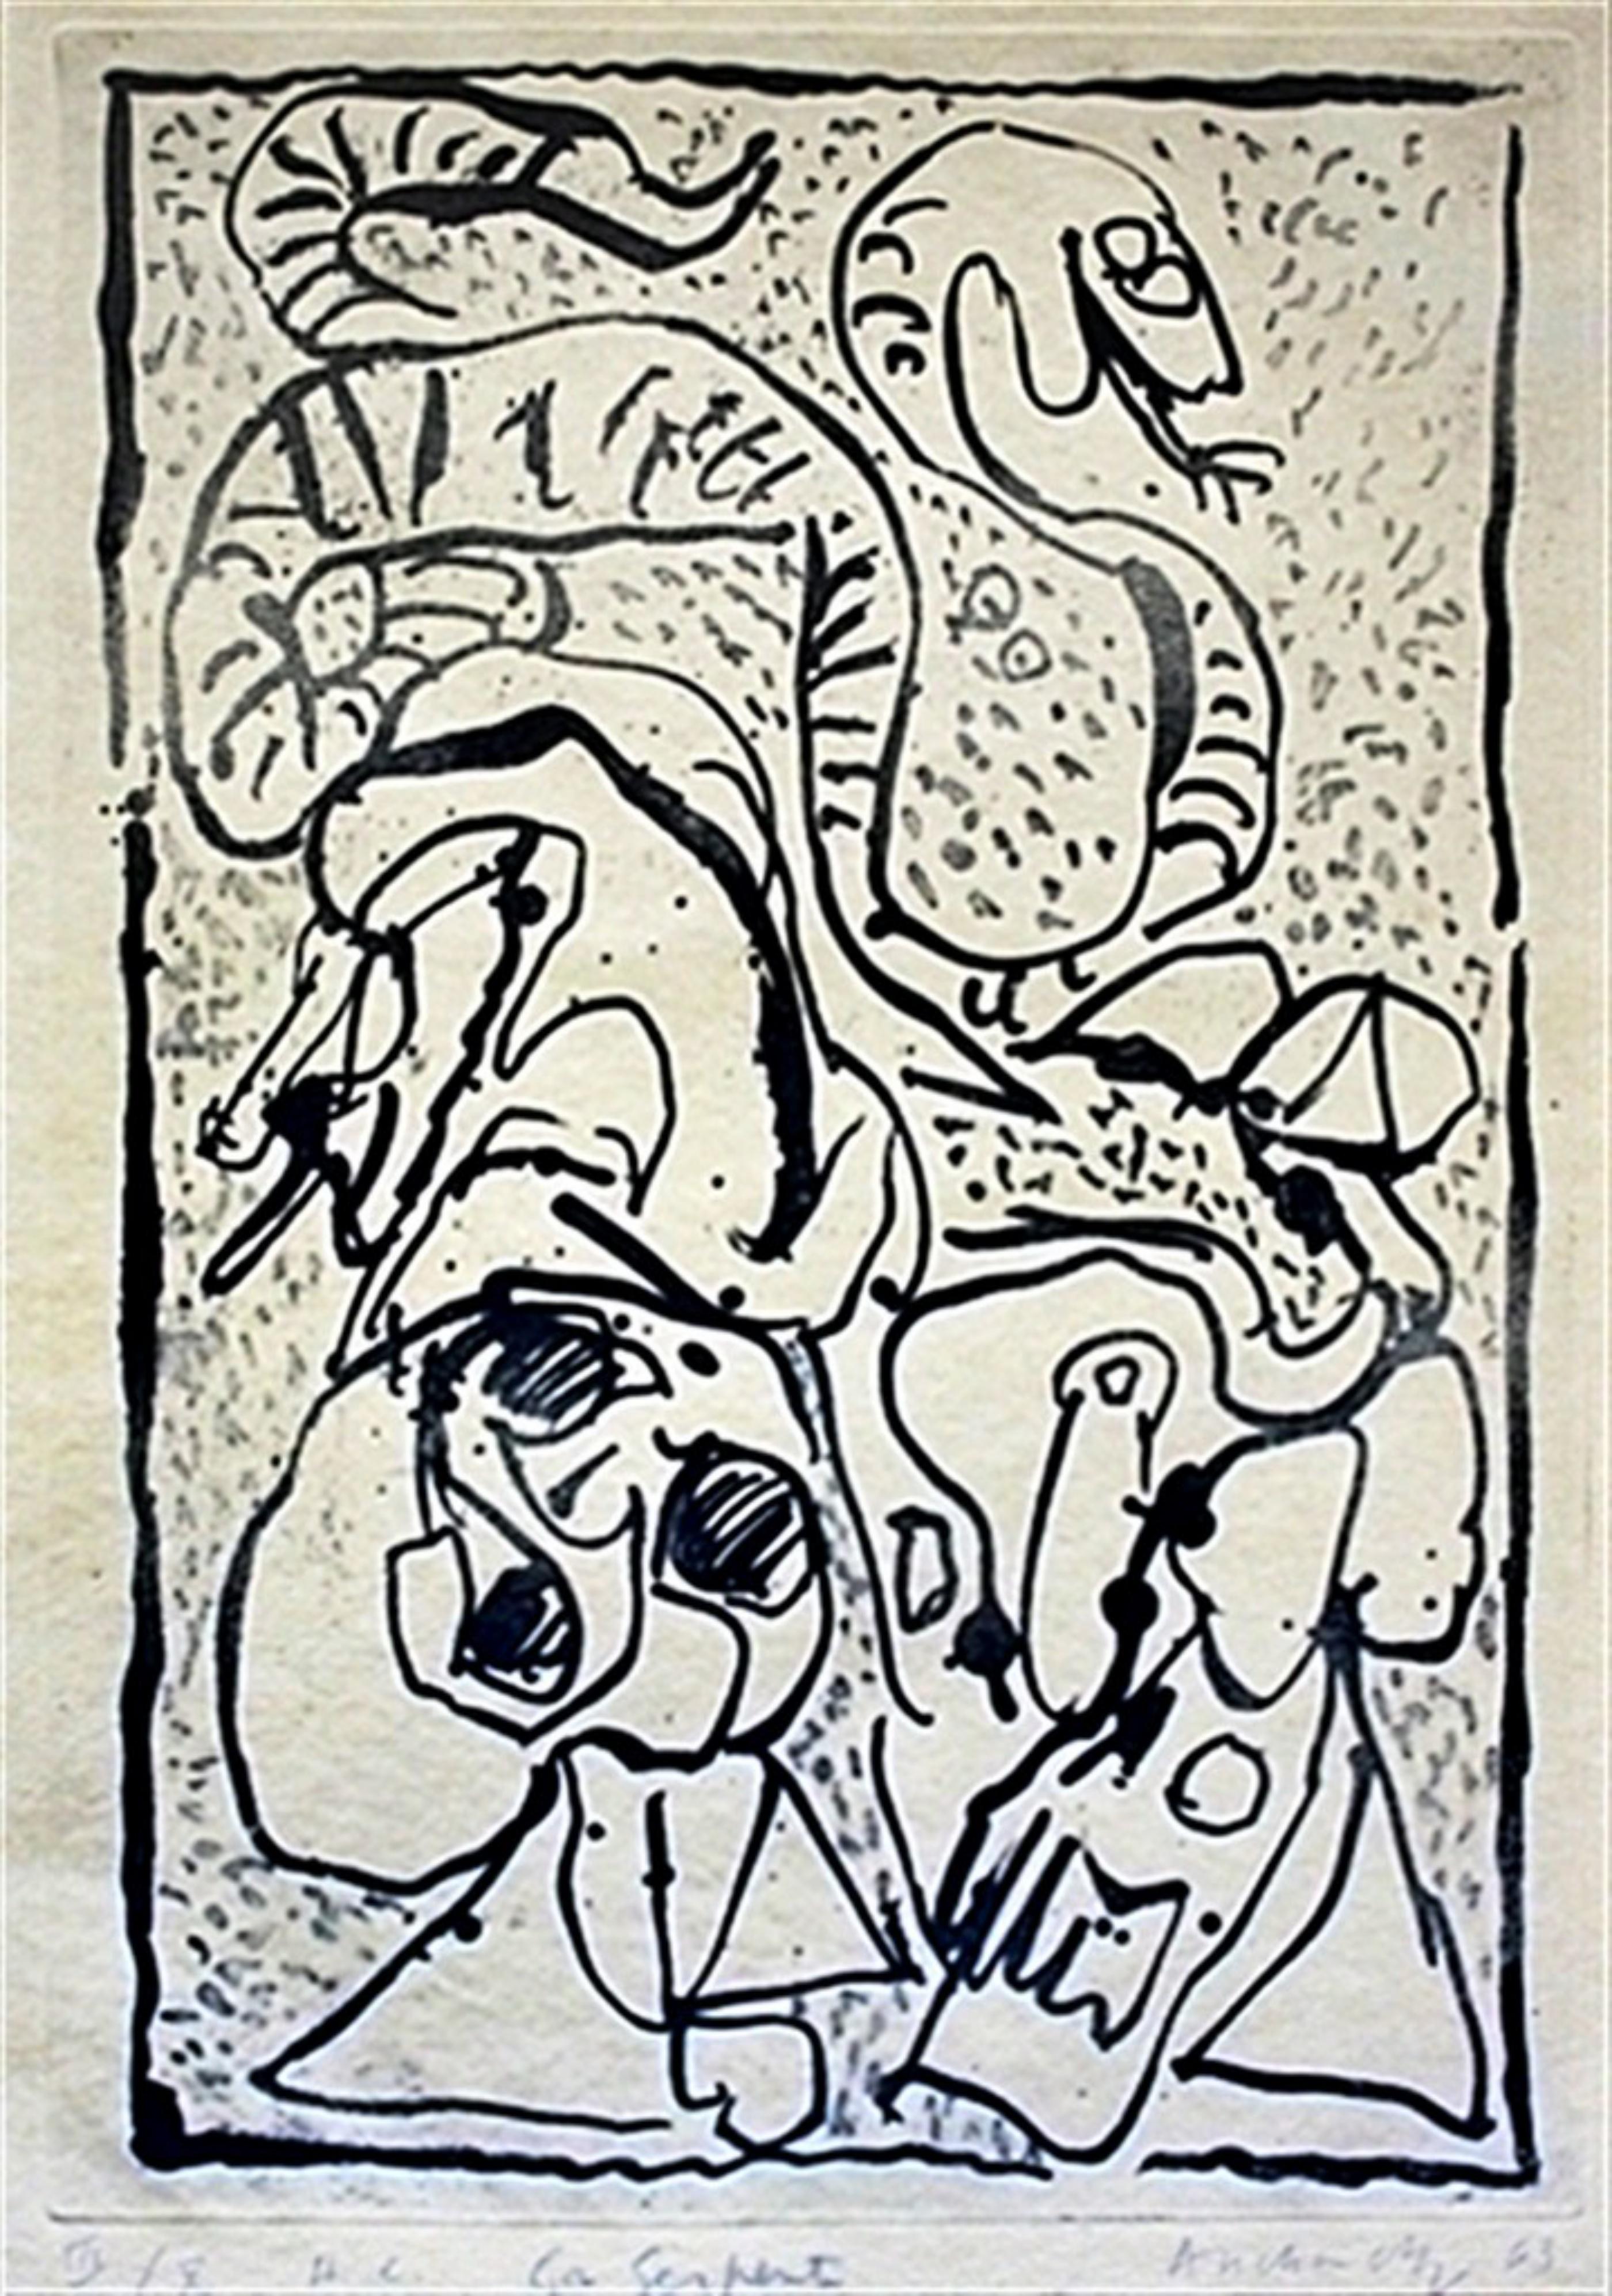 Pierre Alechinsky Abstract Print - Ca Serpente (185, Rivière) Mid Century Modern Serpent by French Expressionist 